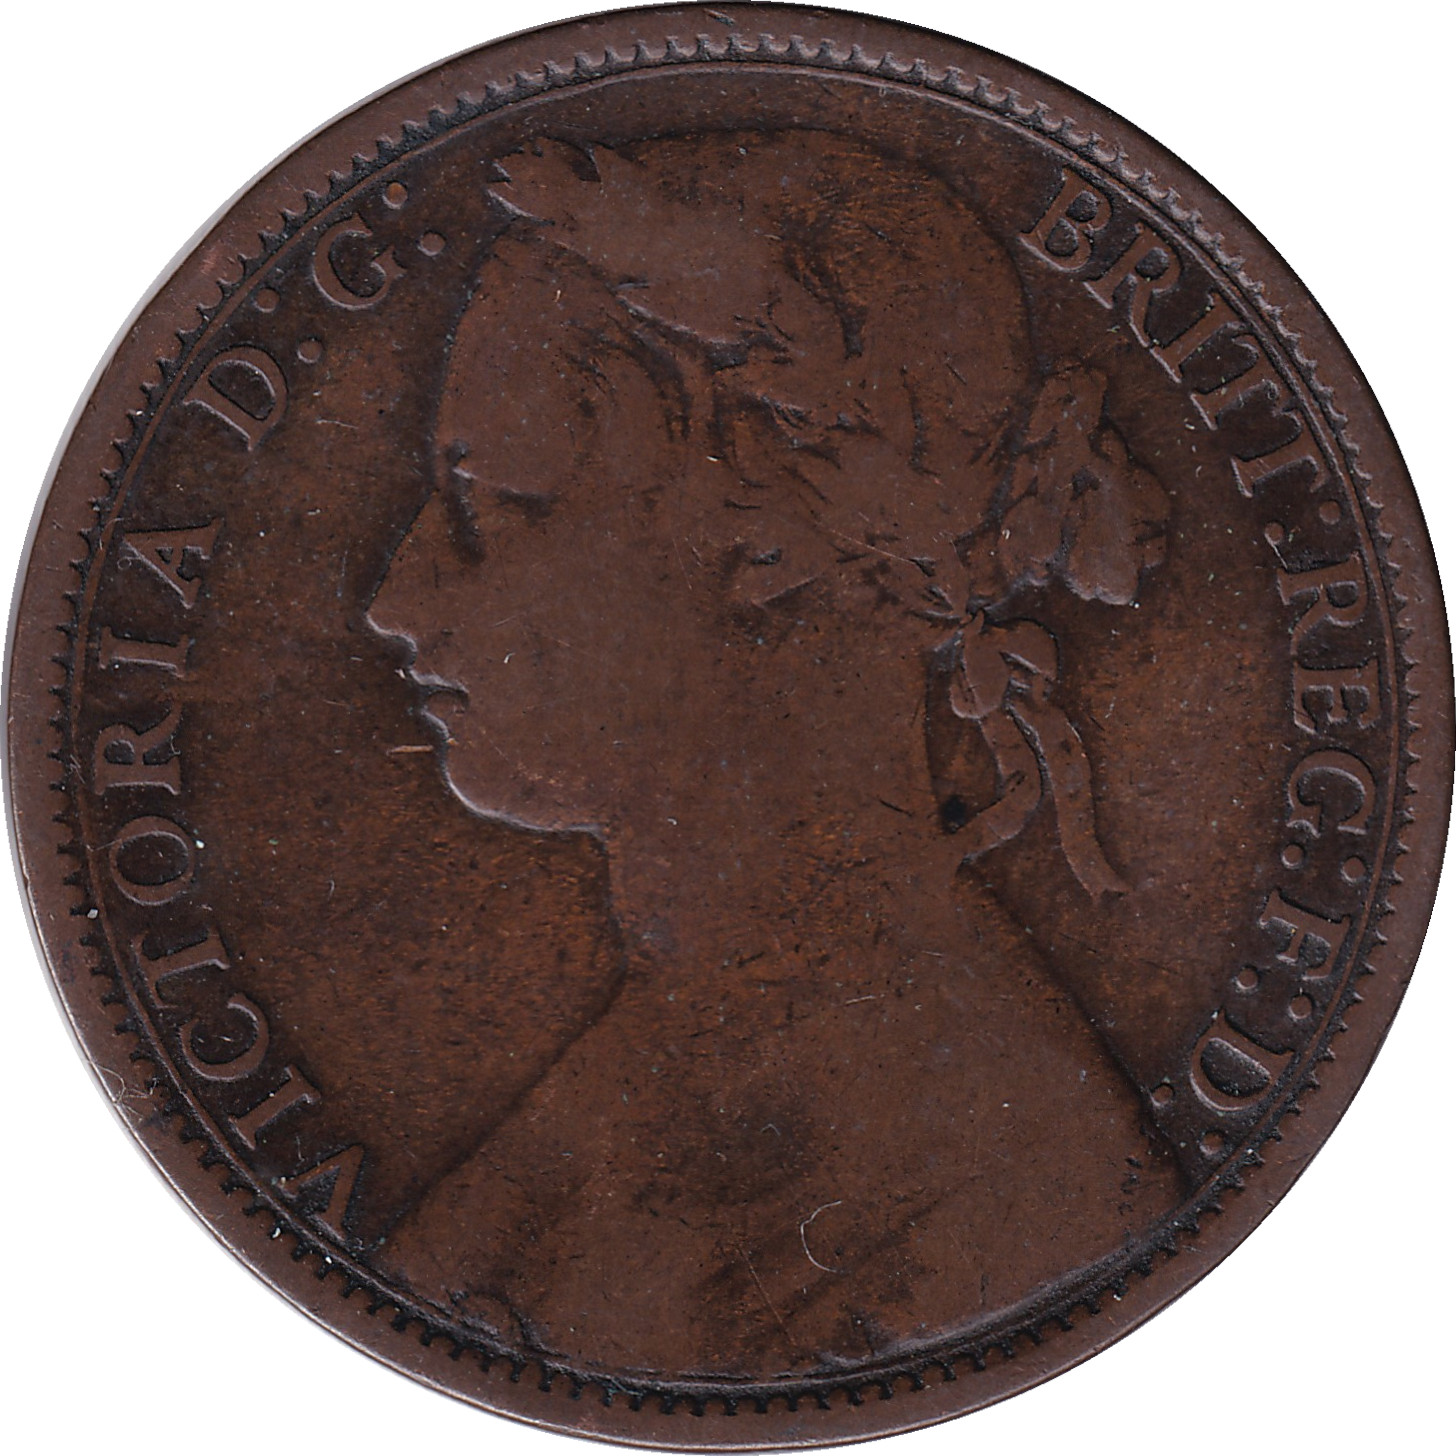 1 penny - Victoria - Mature bust